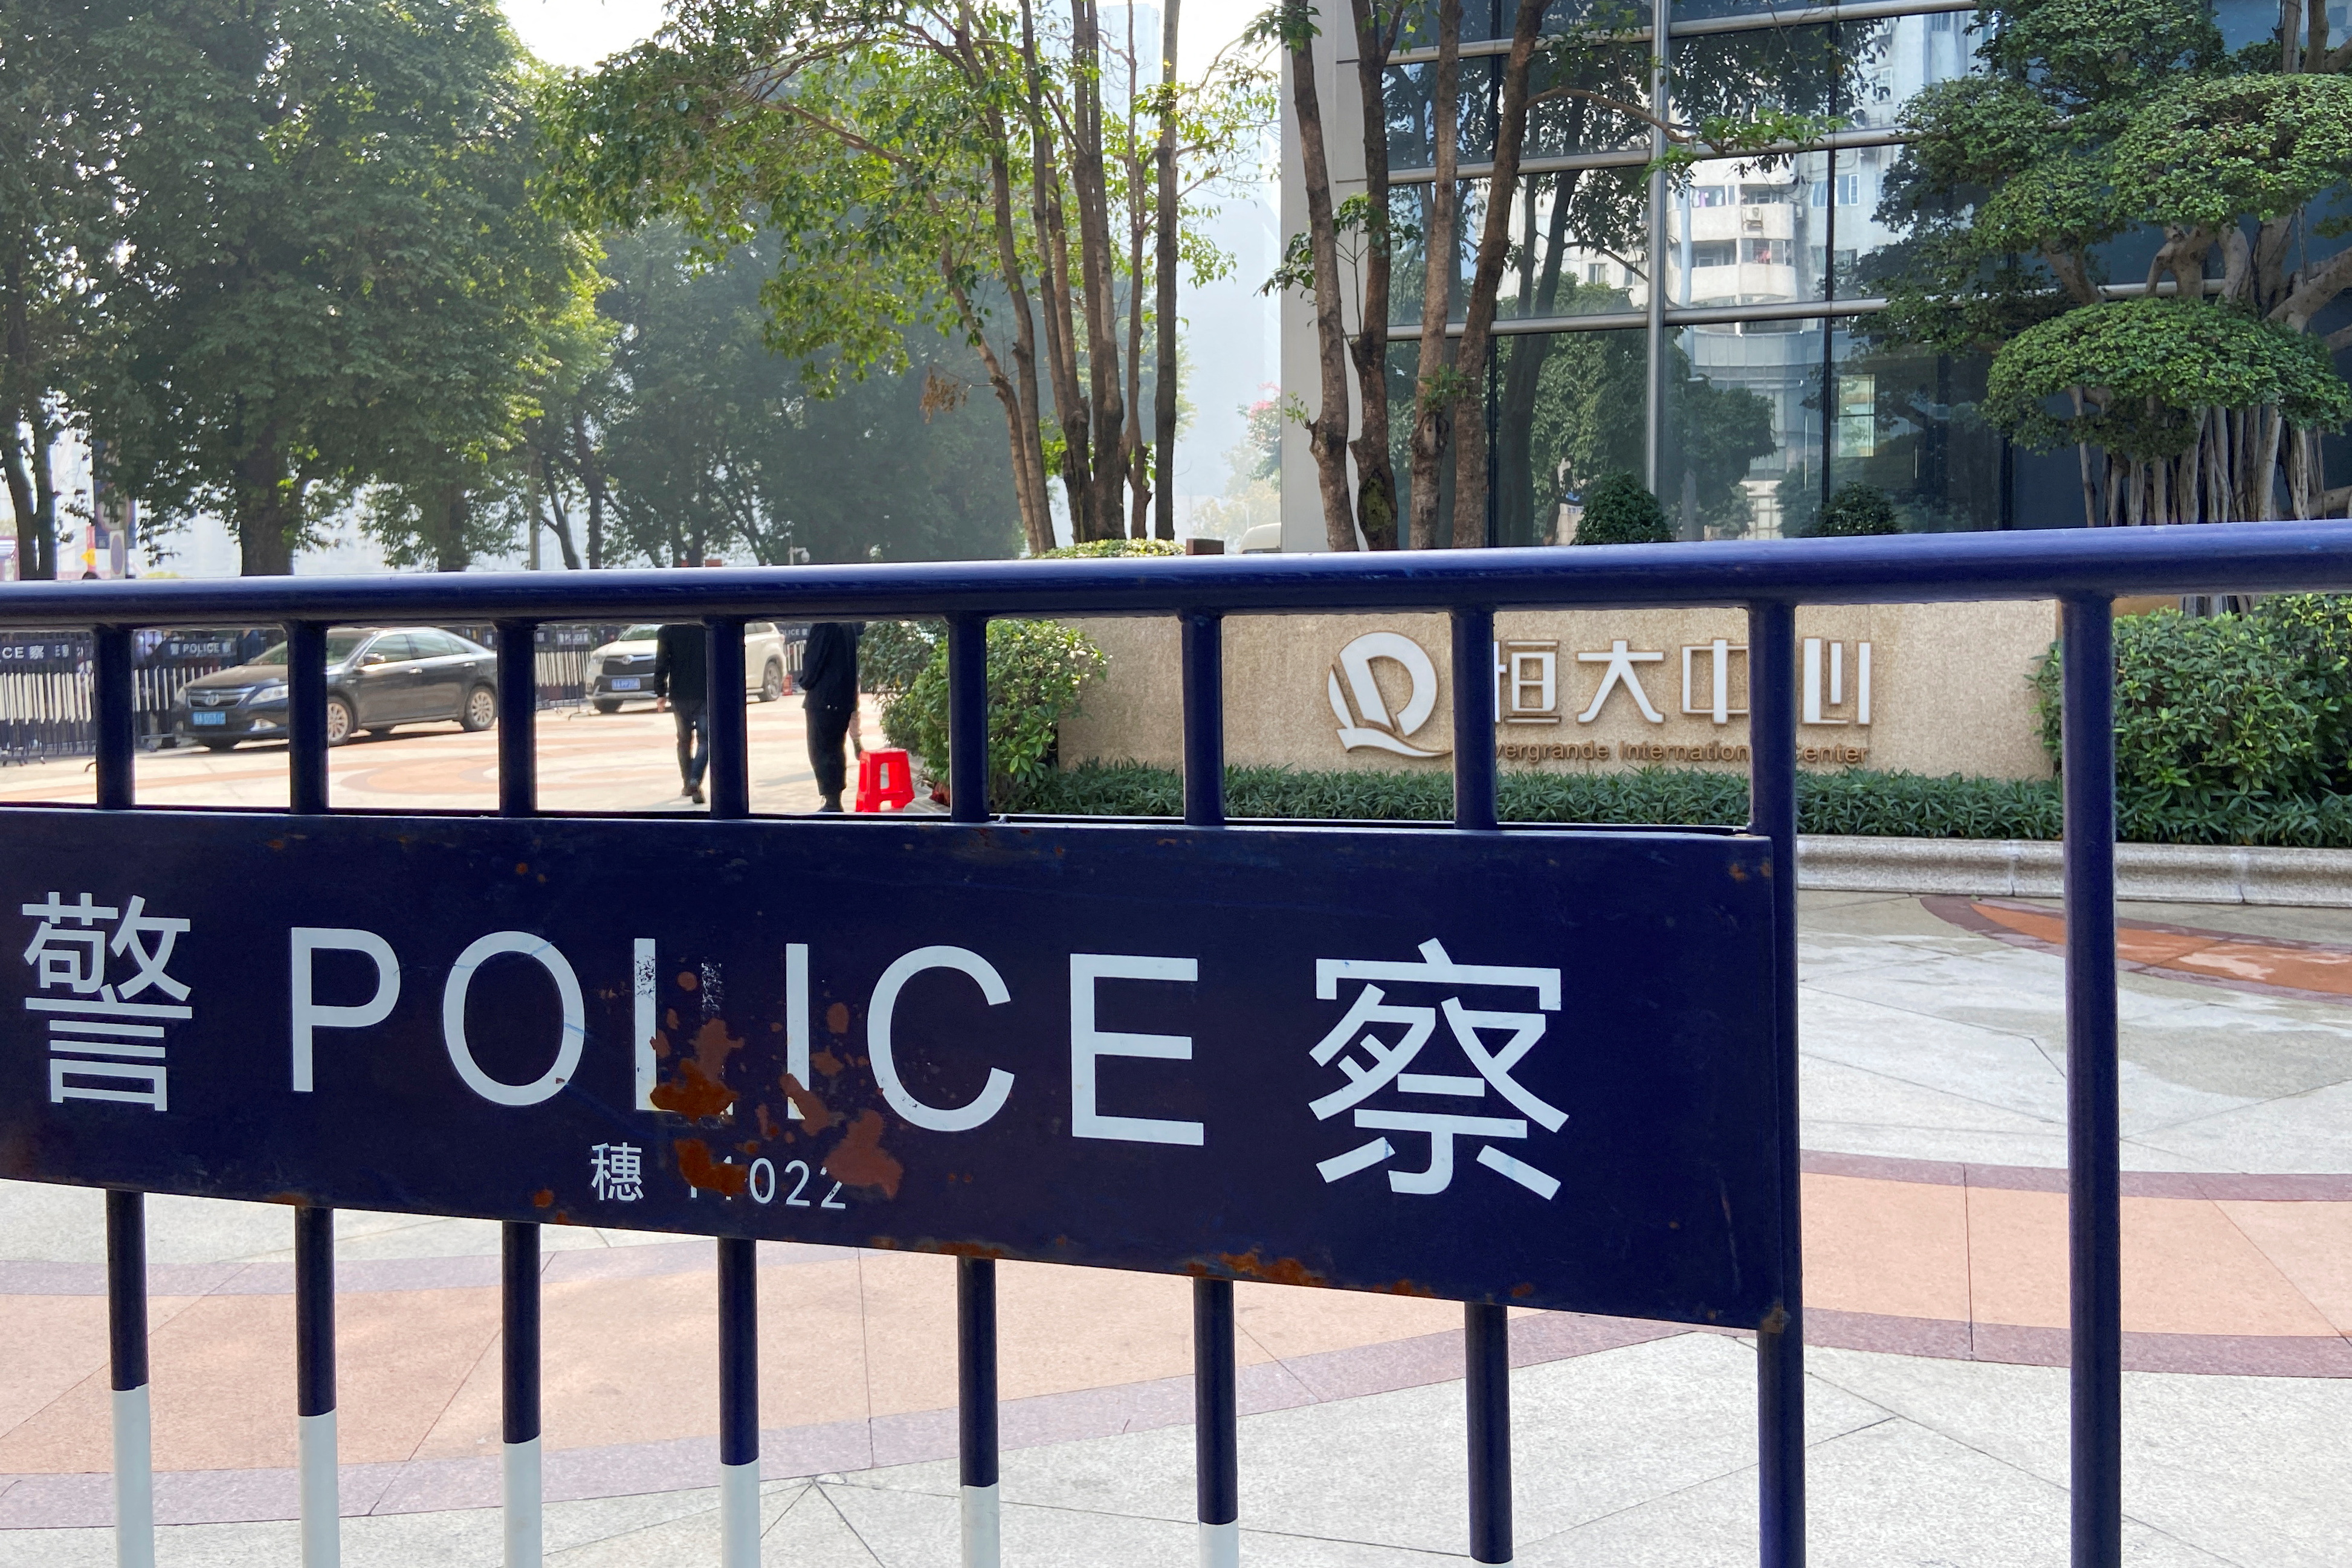 Police barricade is seen outside the Evergrande International Center in Guangzhou